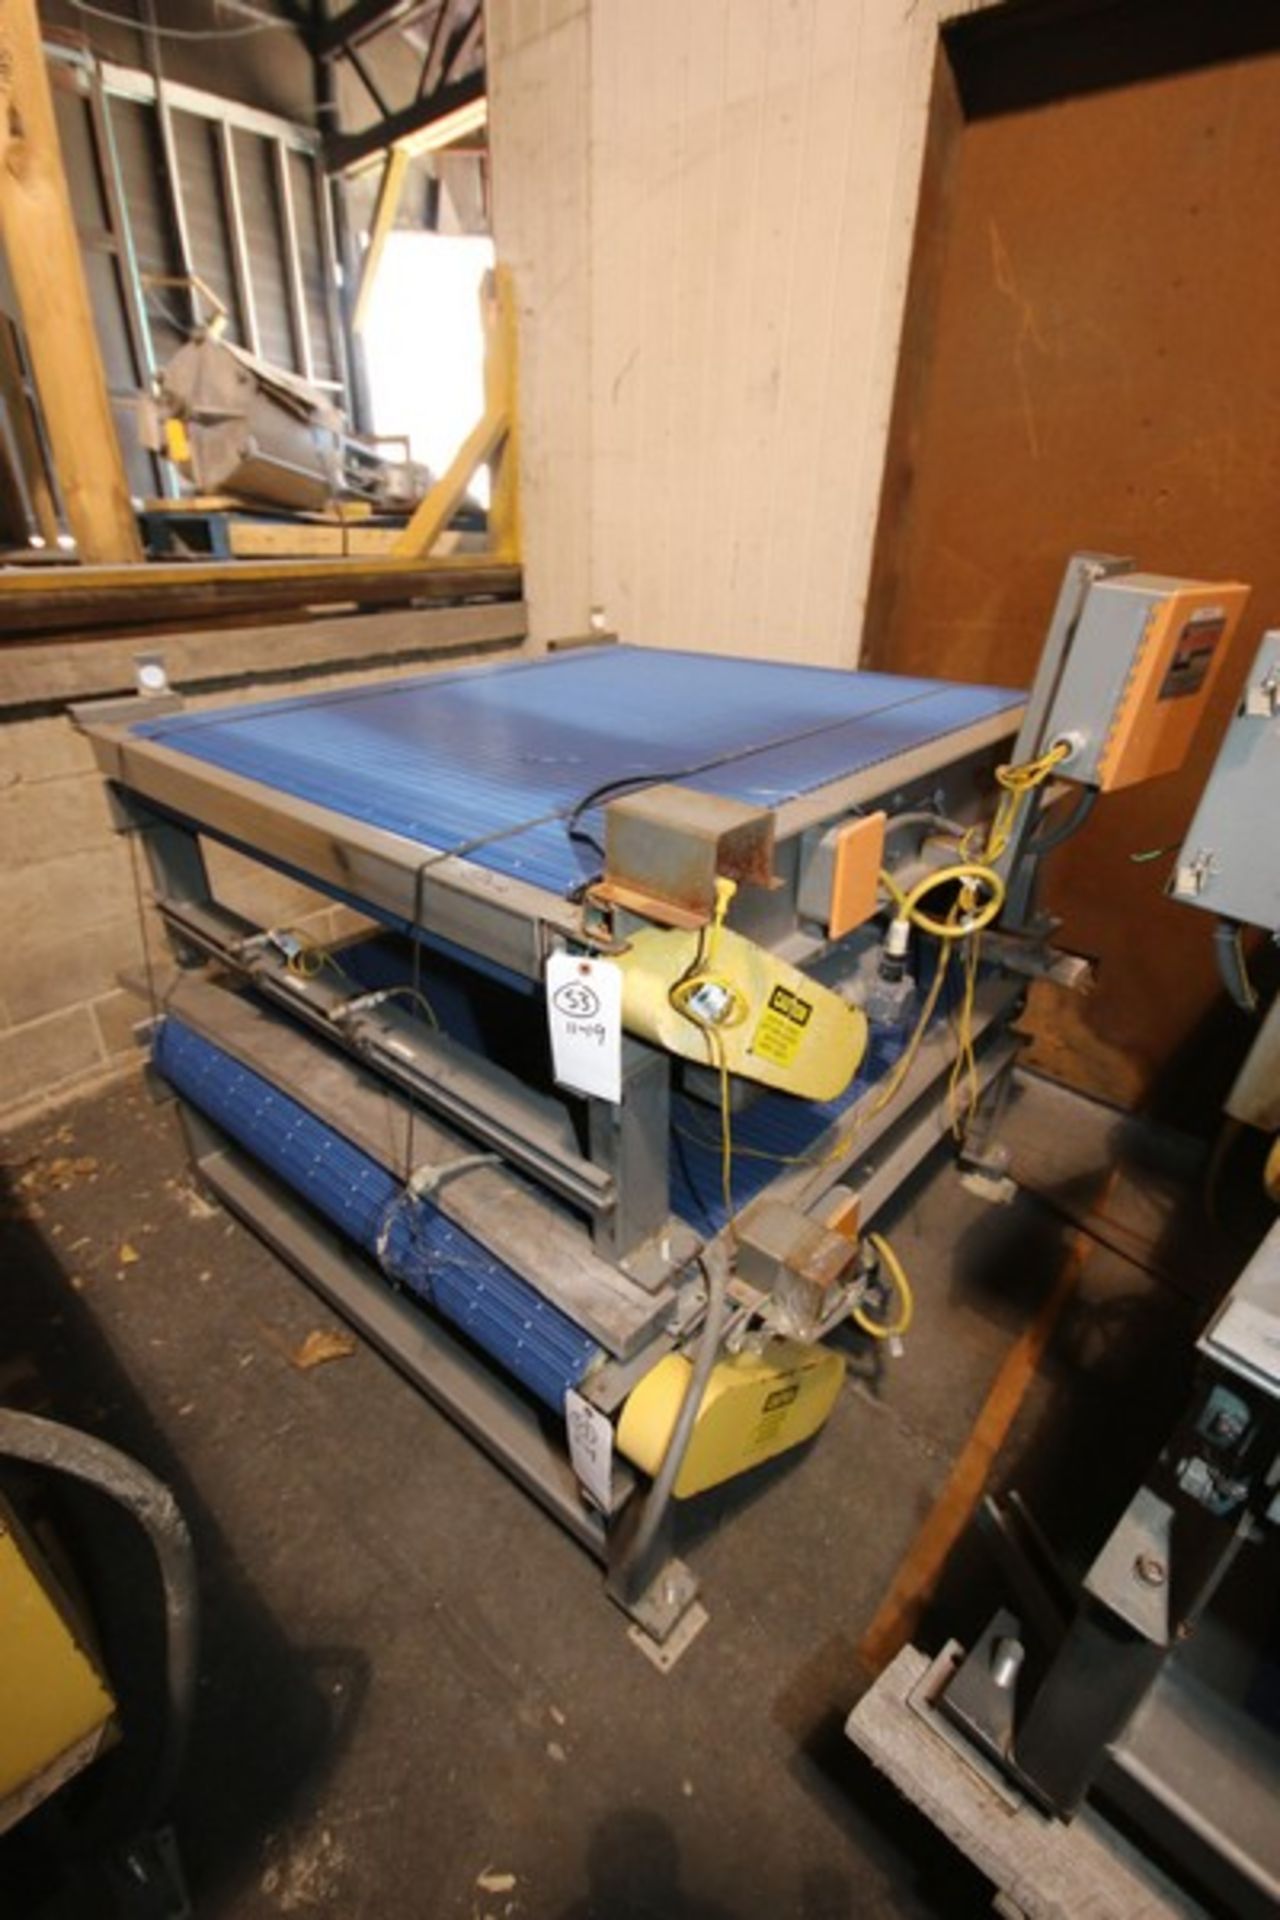 6-Sections of H&CS Conveyors, Overall Dims.:Aprox. 60" L x 64" W x 36" H, with Plastic Blue Belt,